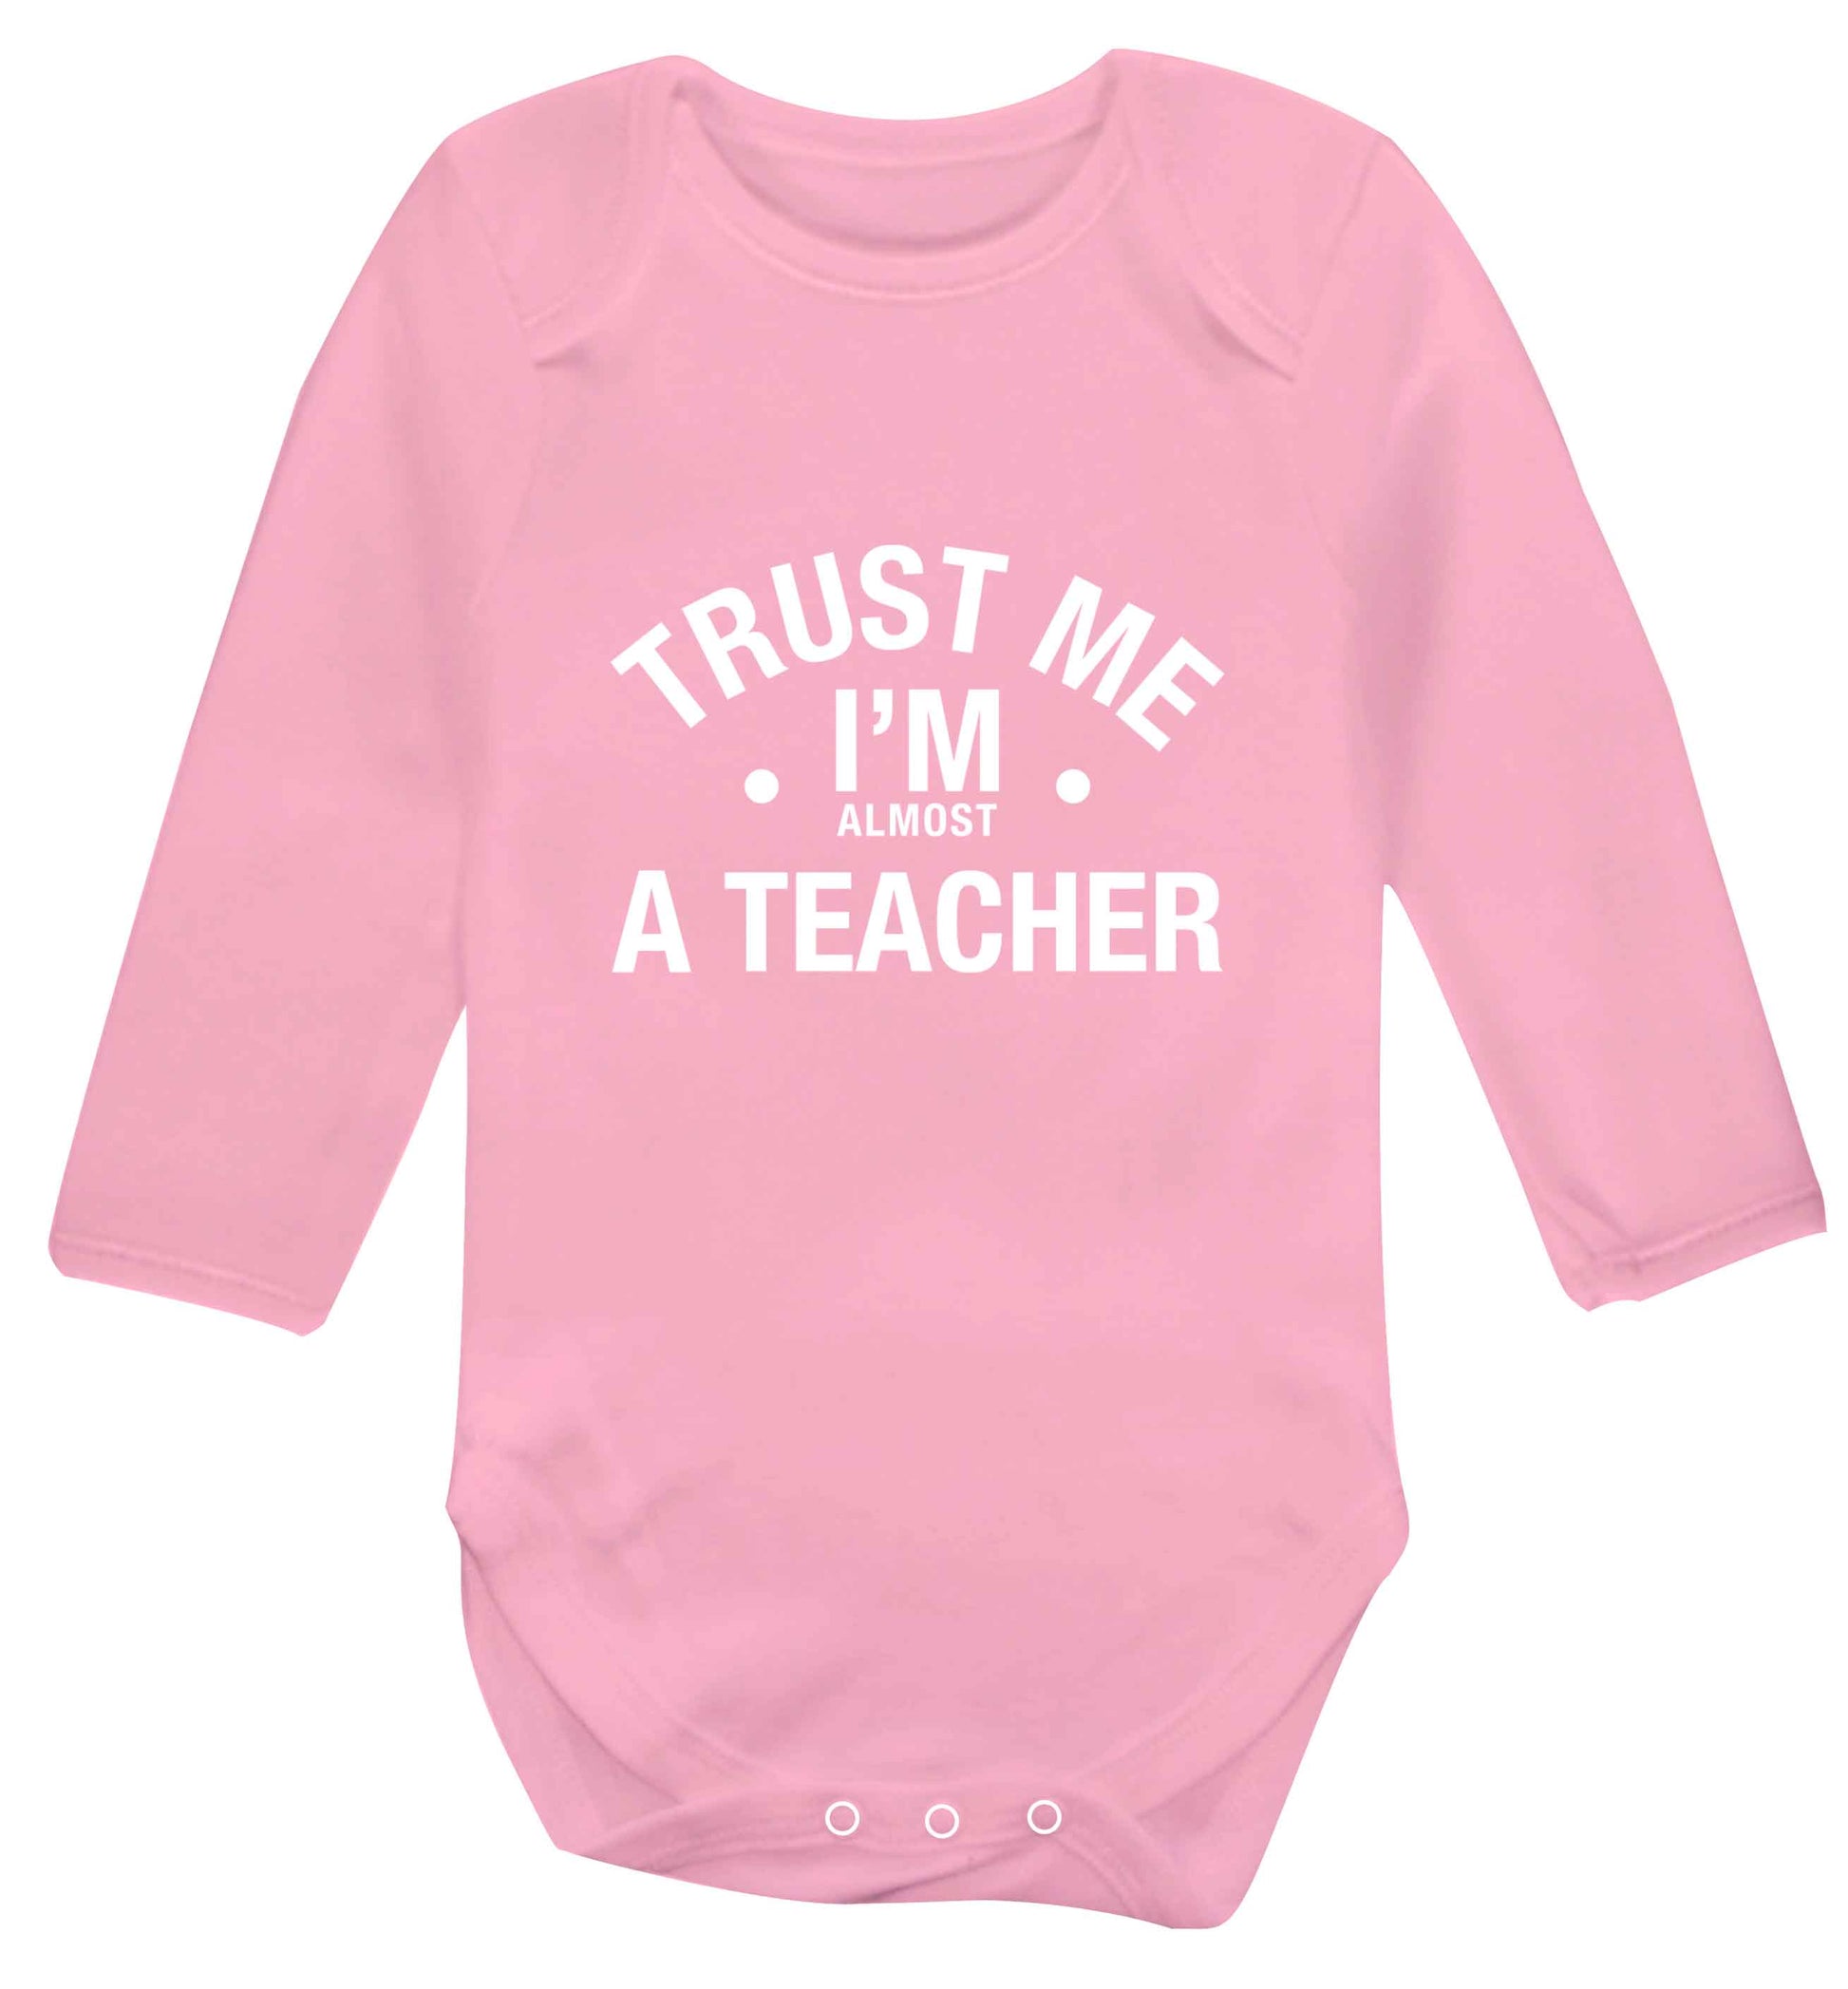 Trust me I'm almost a teacher baby vest long sleeved pale pink 6-12 months